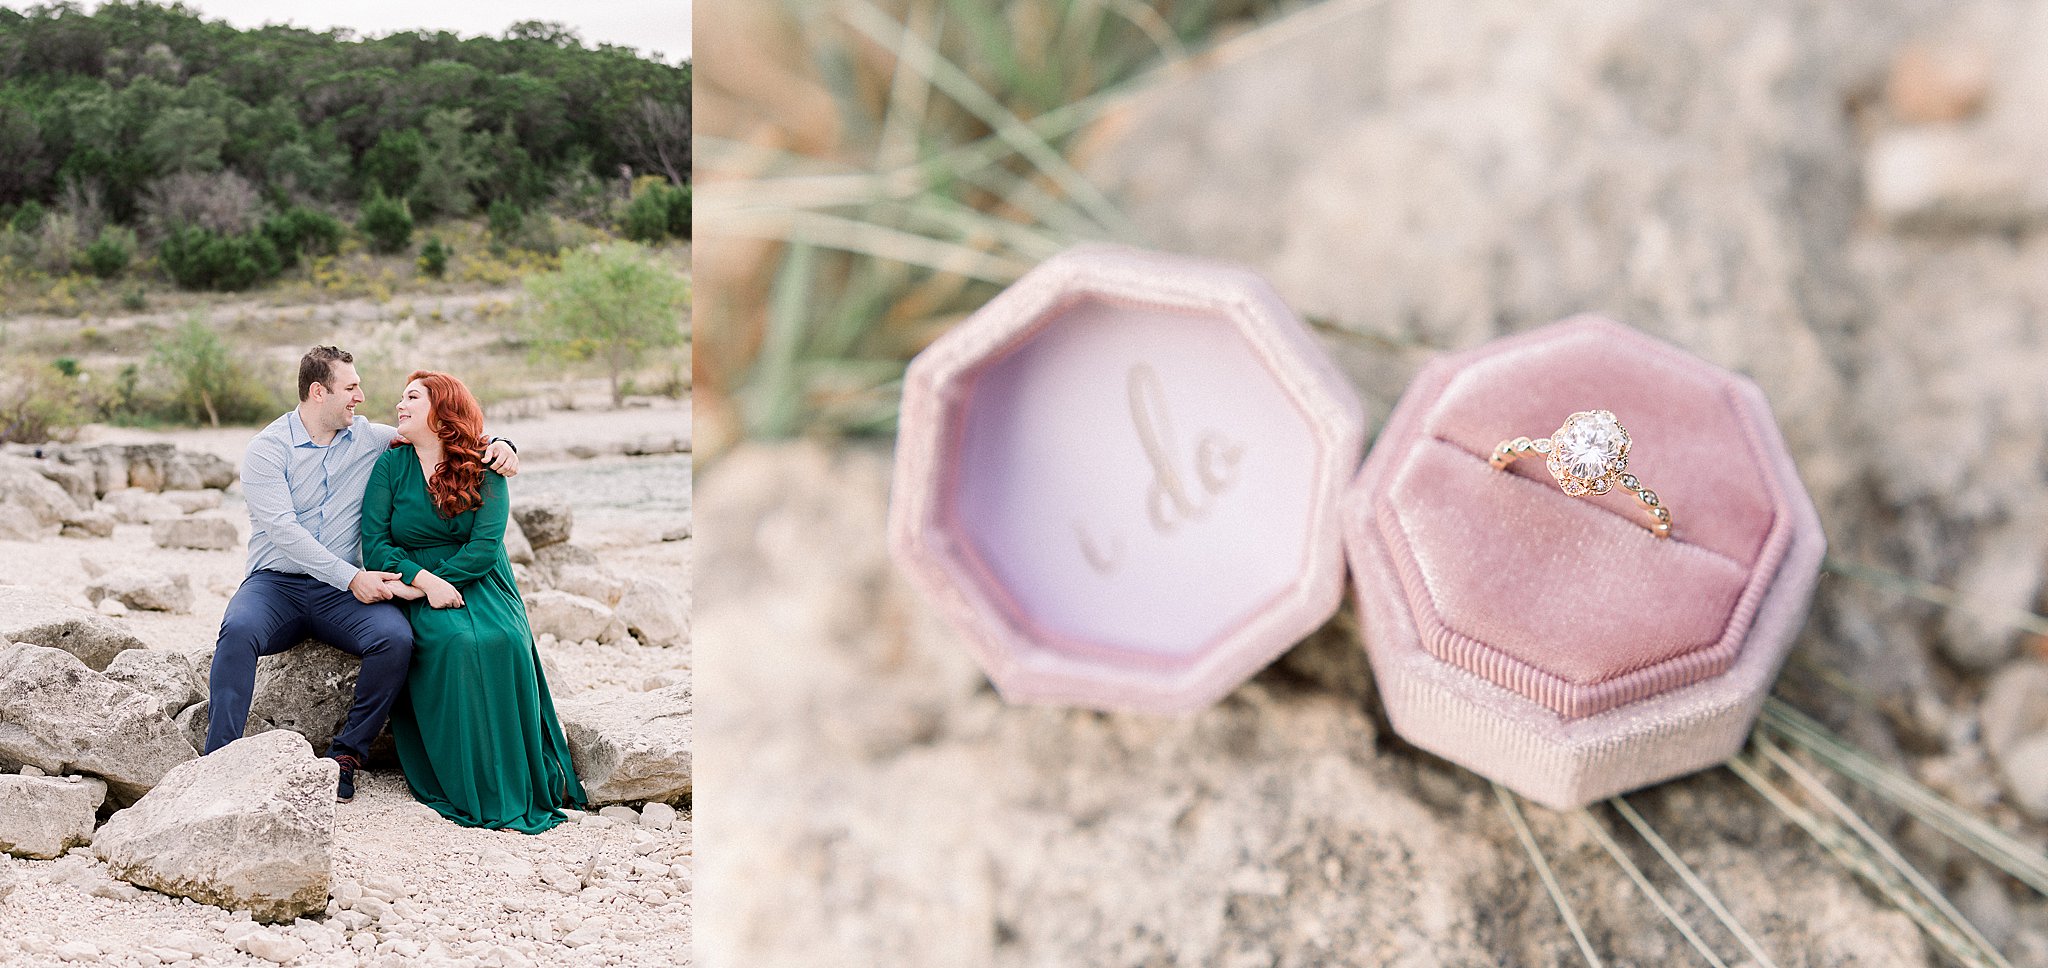 "I Do" Velvet Ring Box, Oval Engagement Ring, Anna Kay Photography, Hill Country Wedding Photography